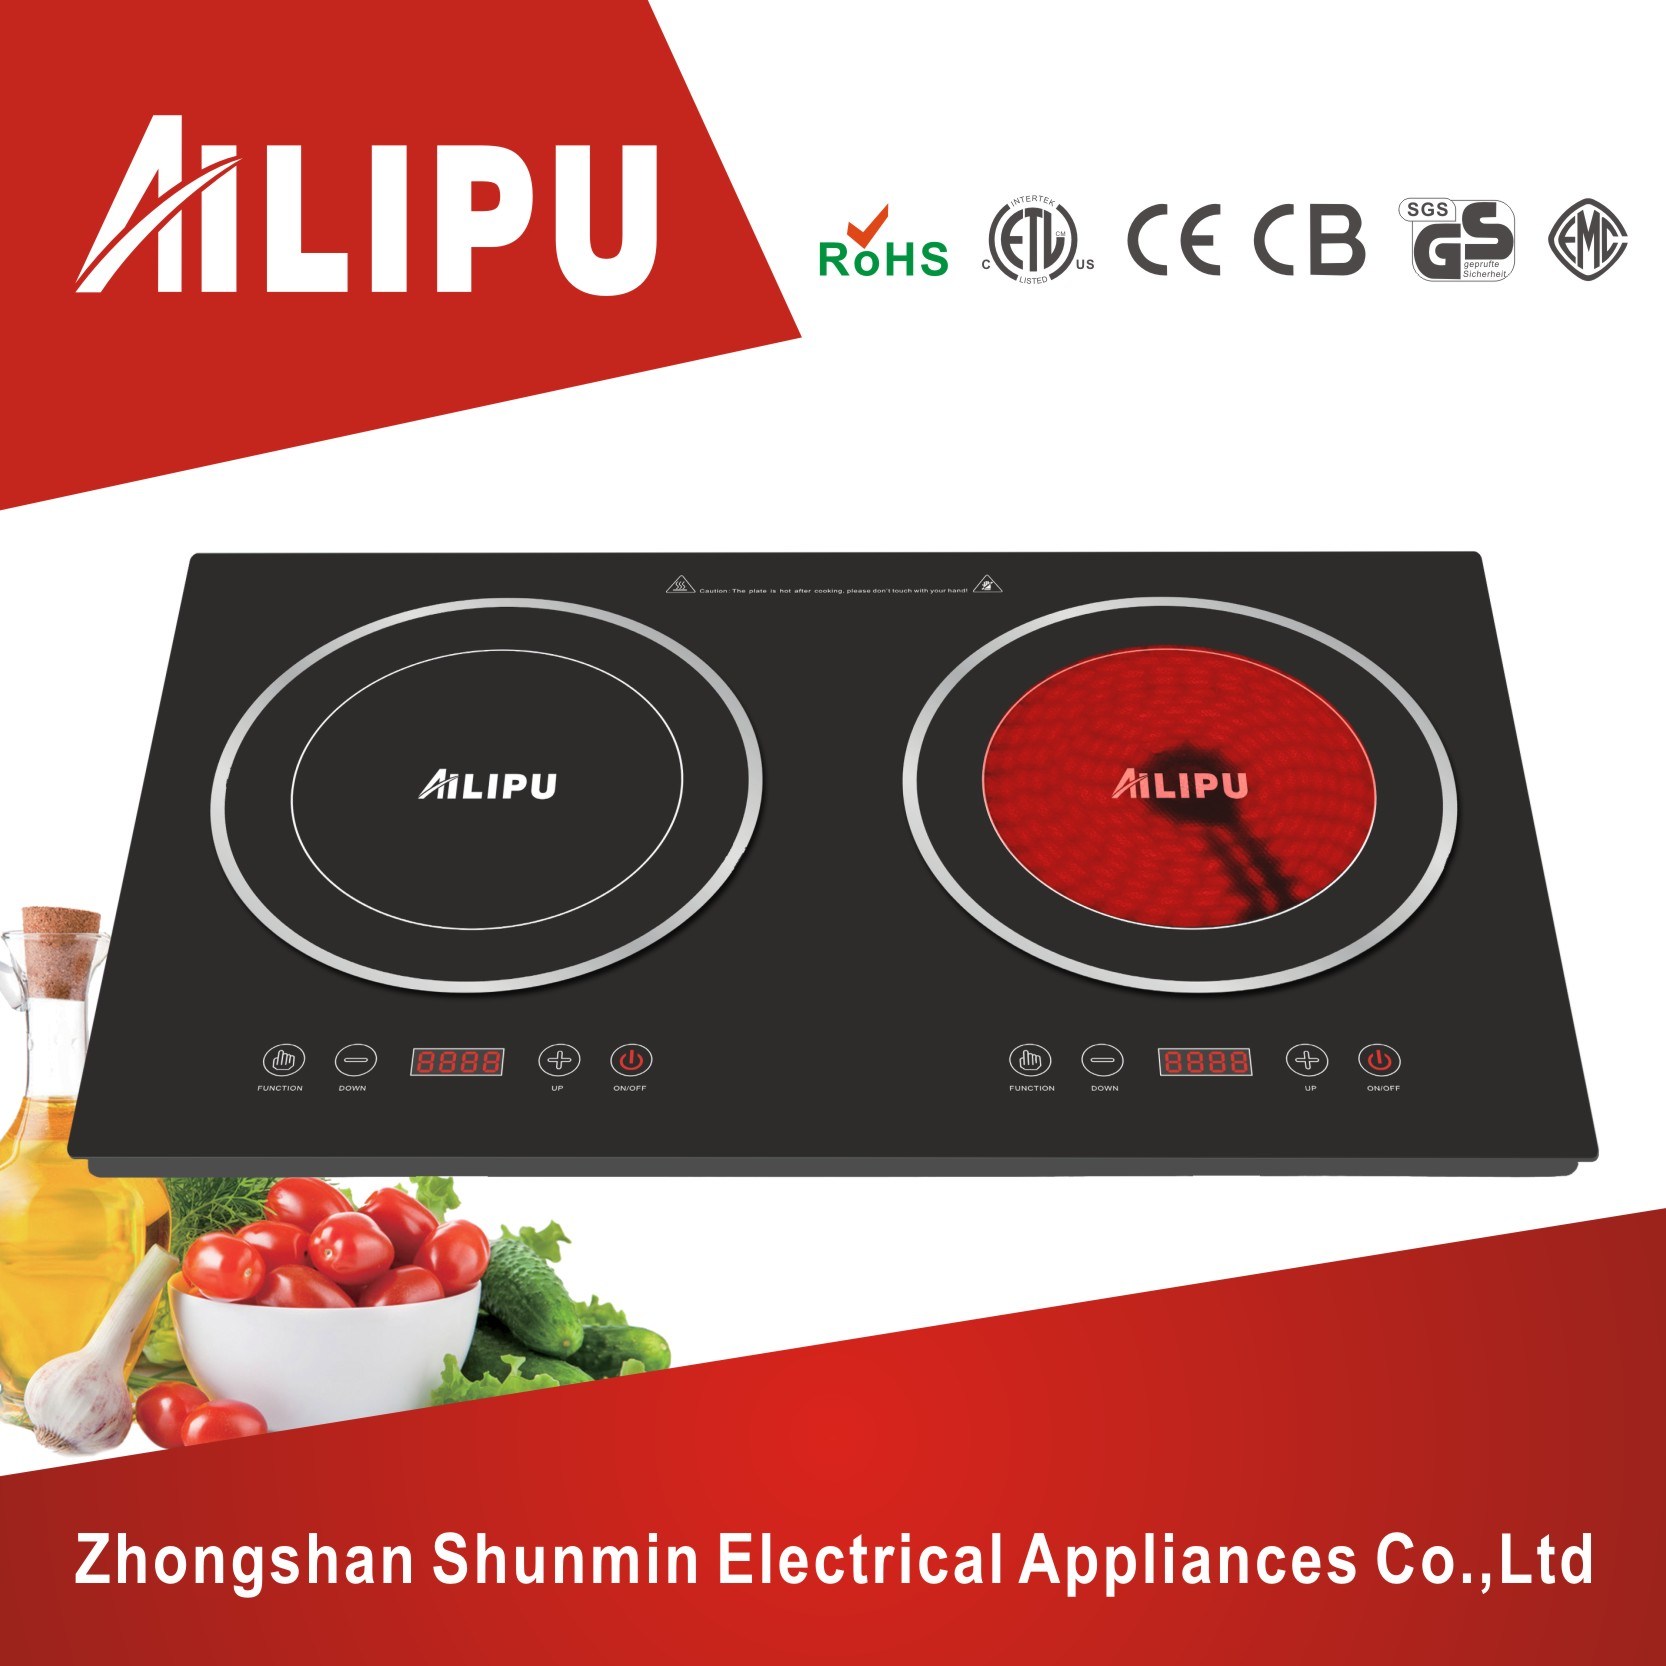 Built in&Table Top Electric Double Plate Cooktop/Induction with Infared Cooker/Electromagnetic Oven